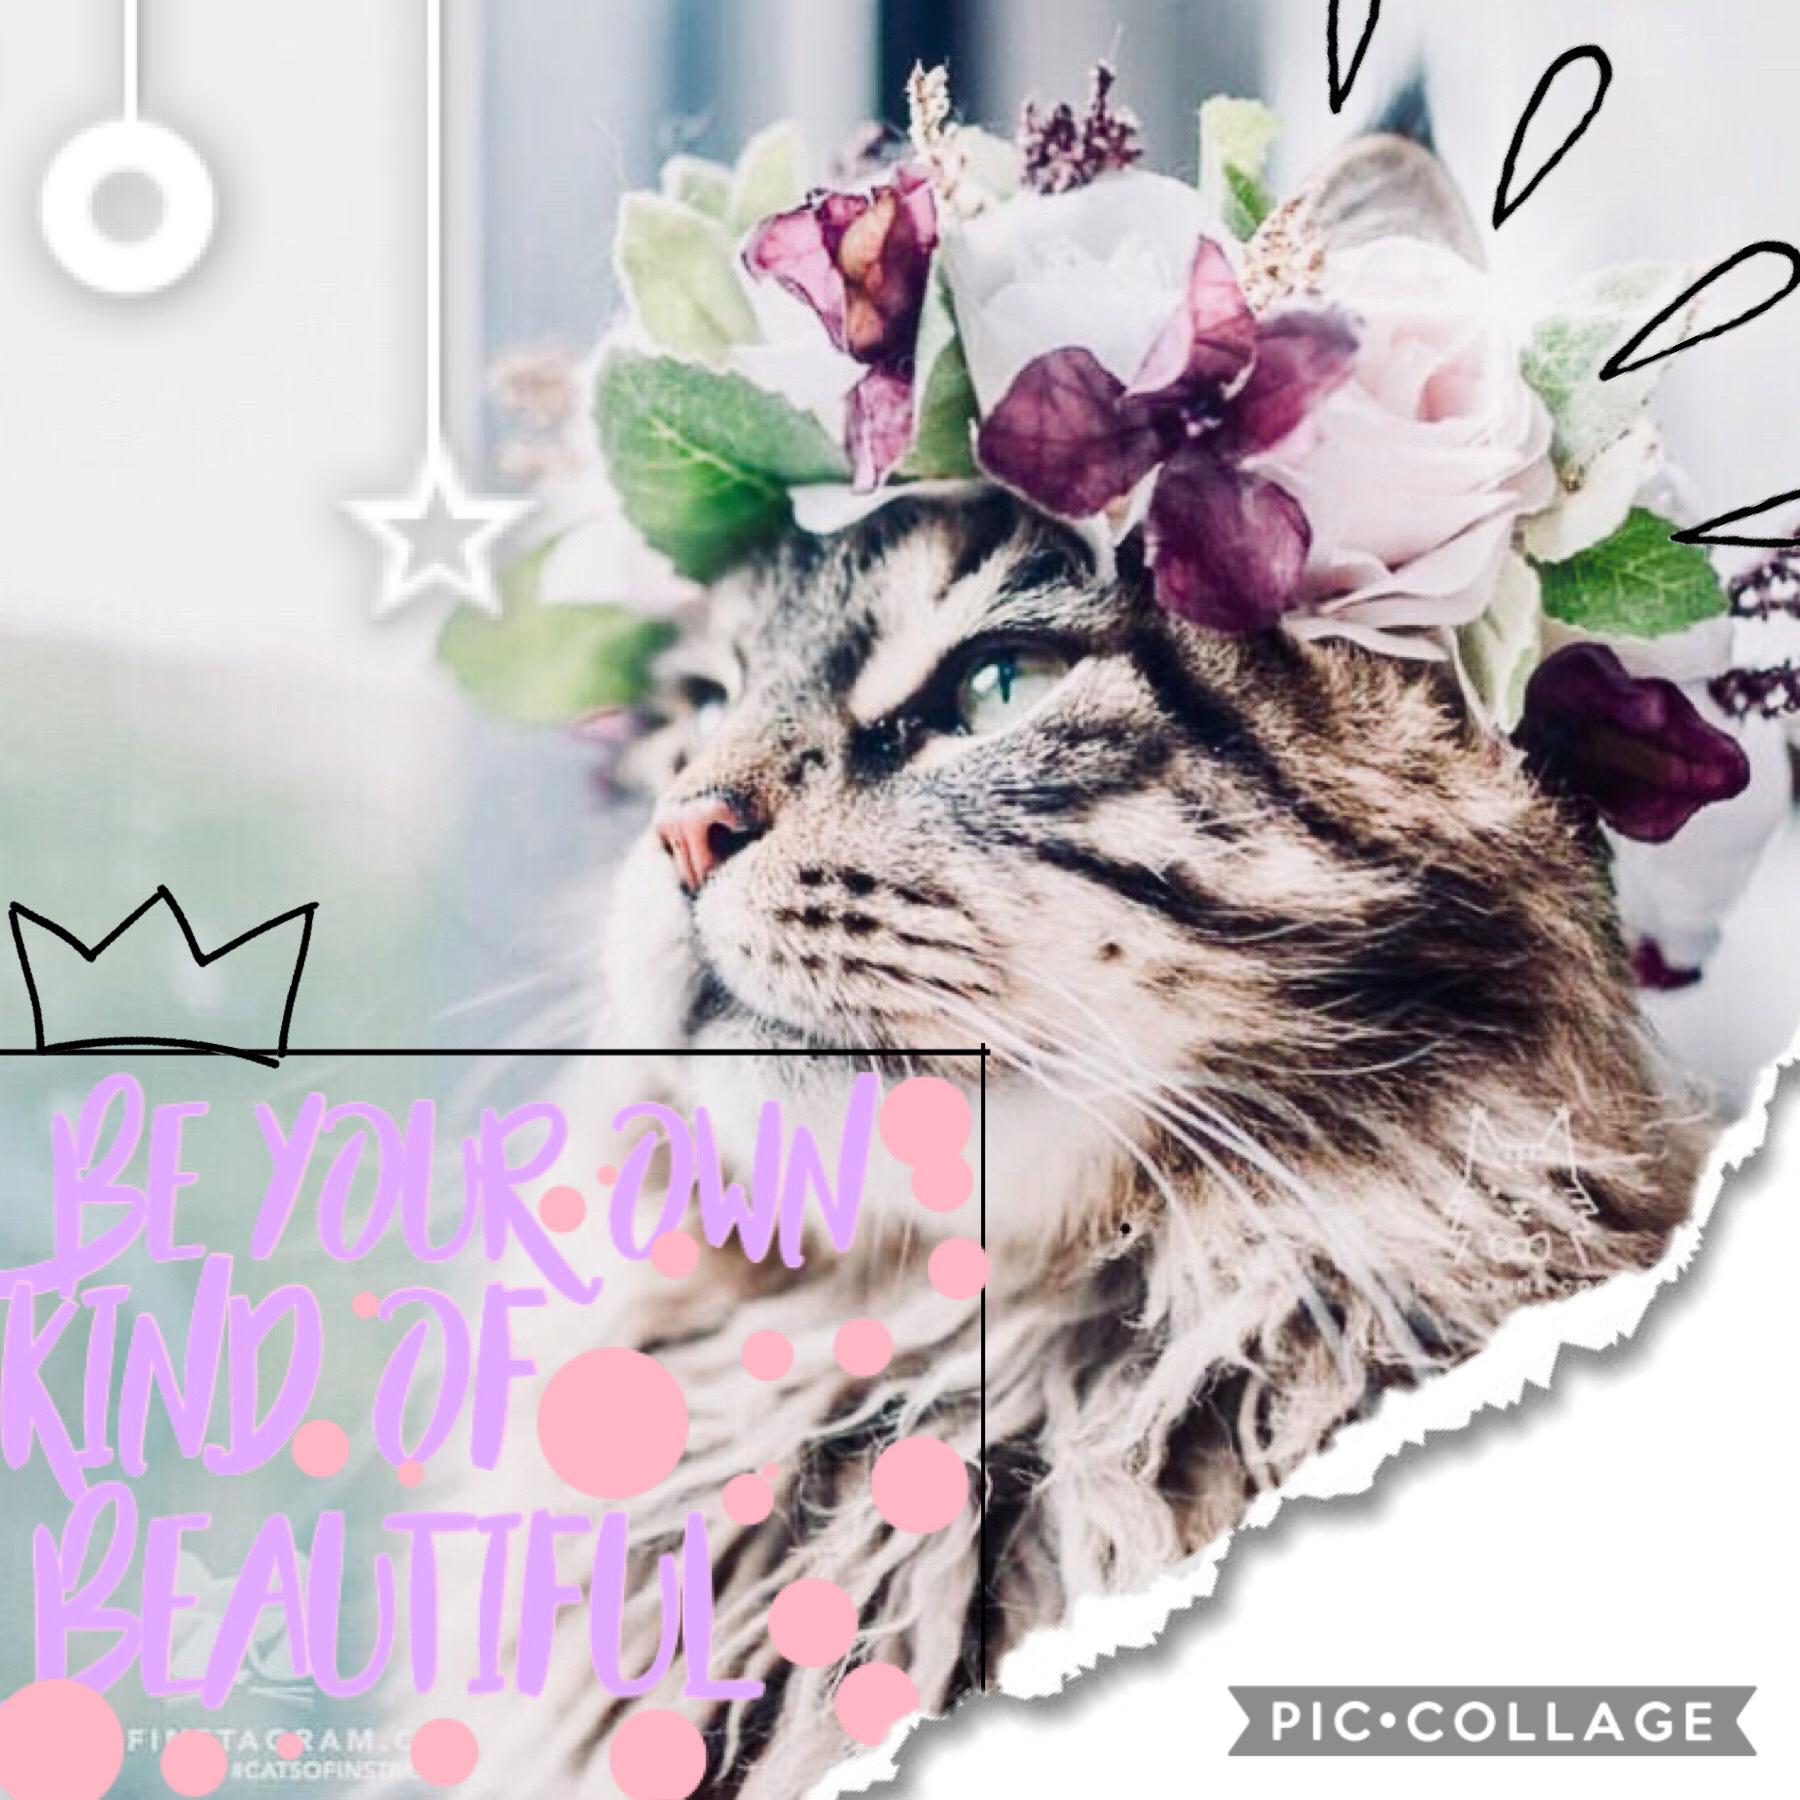 👑tap for flower crowns👑
👑👑👑👑👑👑👑👑👑👑👑👑👑👑👑👑🌸🌸🌸🌸🌸🌸🌸🌸🌸🌸🌸

Qotd: fave hair accessory 
Aotd: nothing, I just wear my hair down!